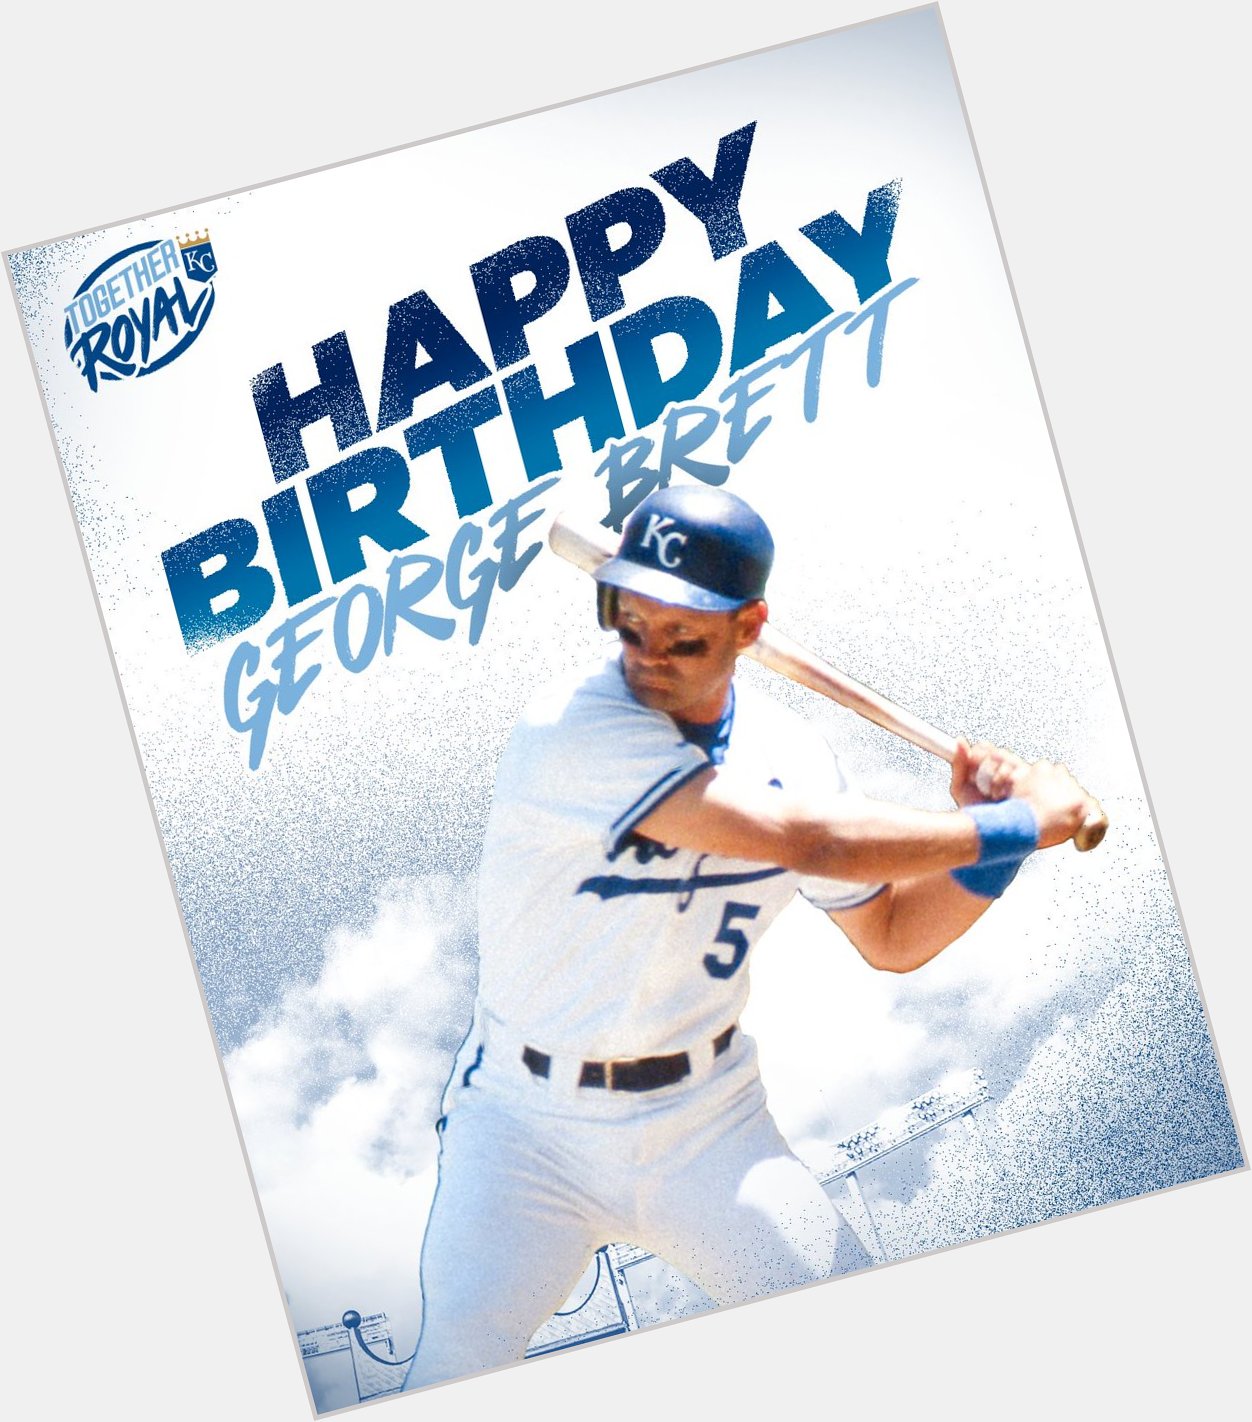 One of the greatest to ever do it. 

Happy birthday, George Brett! 